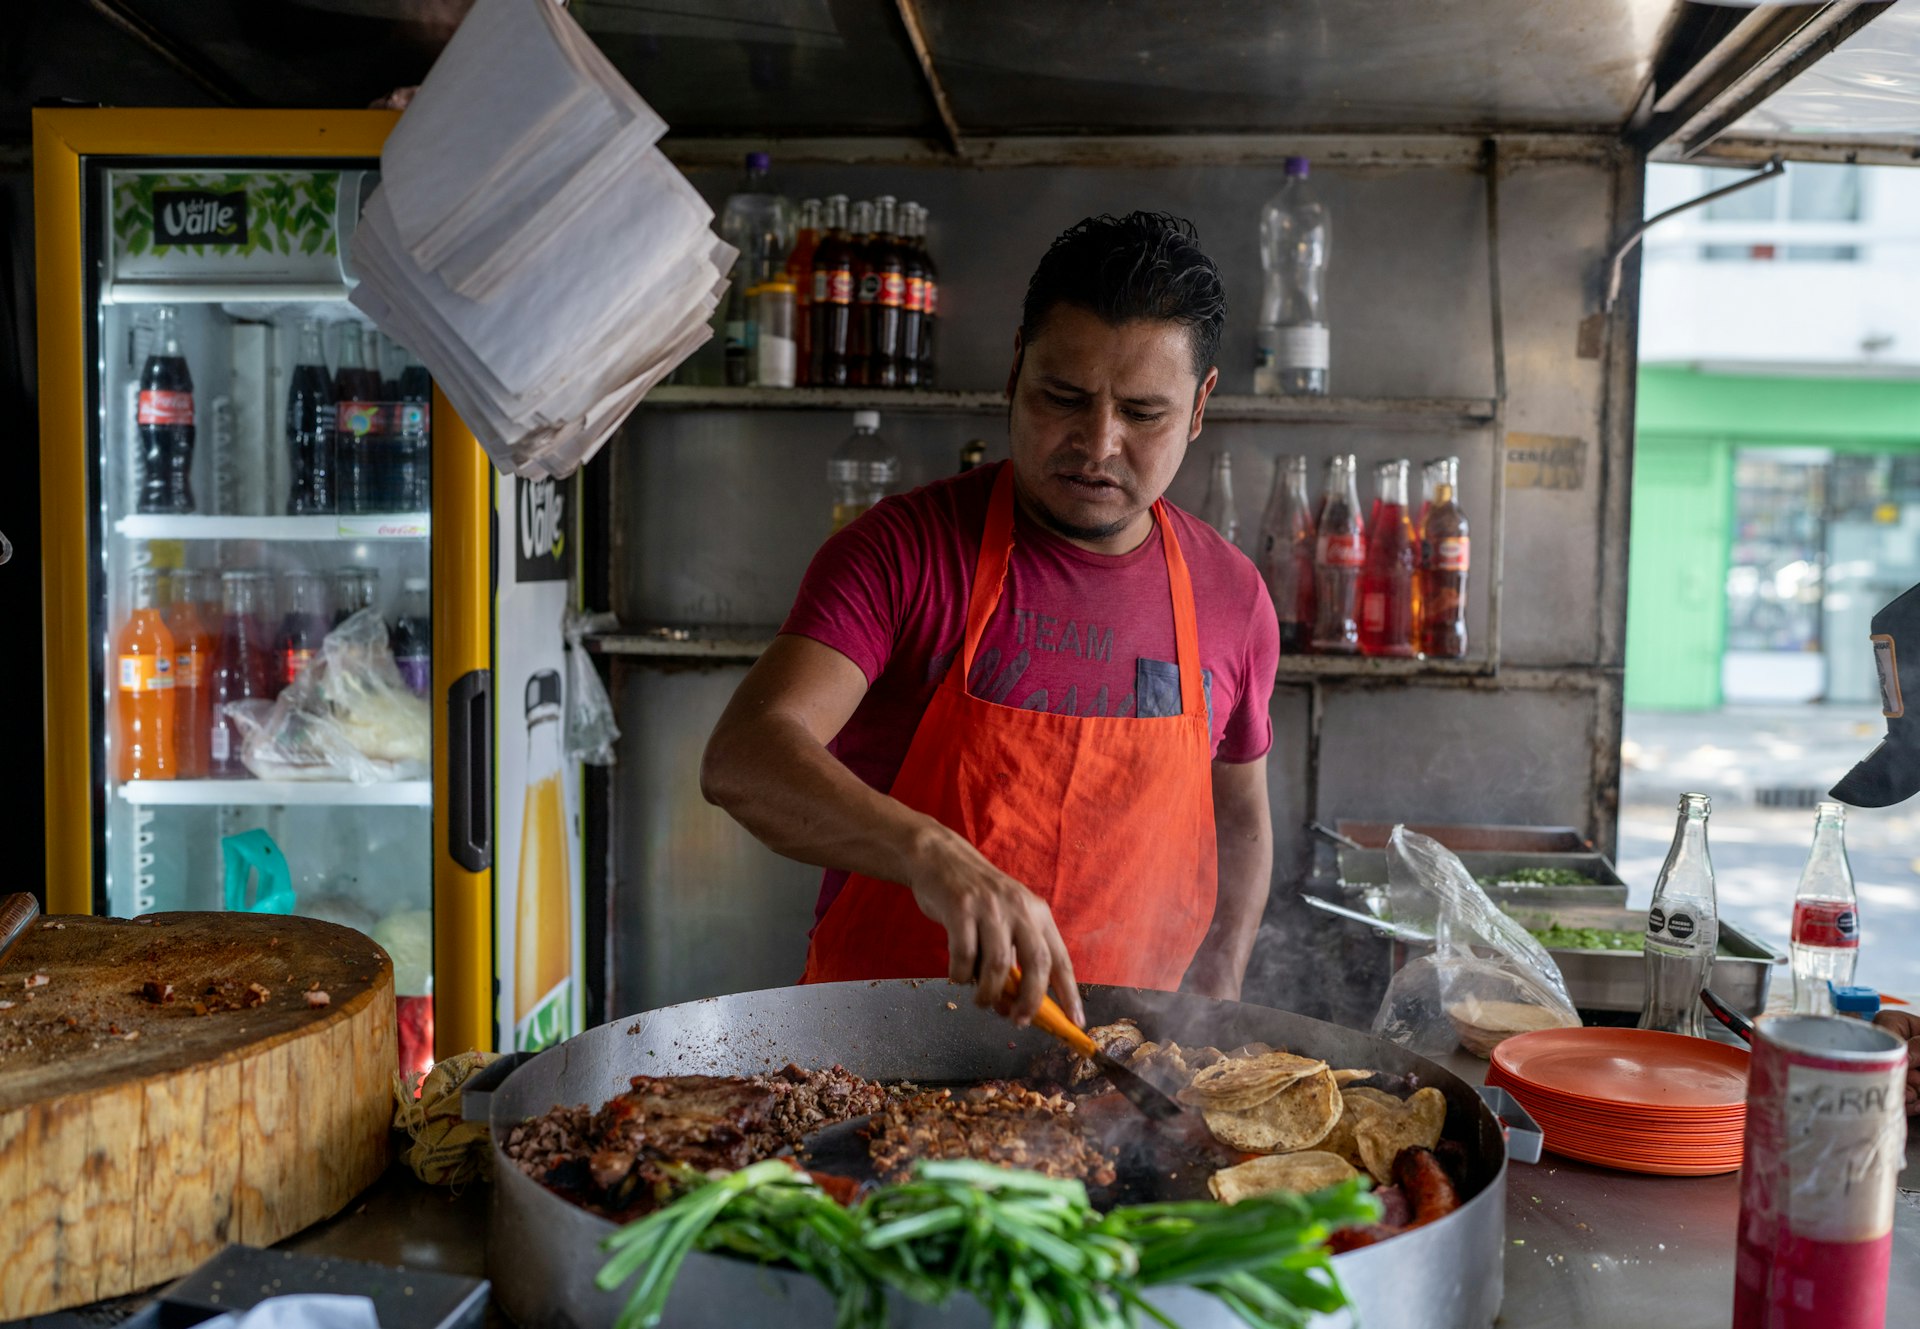 Street-food tacos in Mexico City